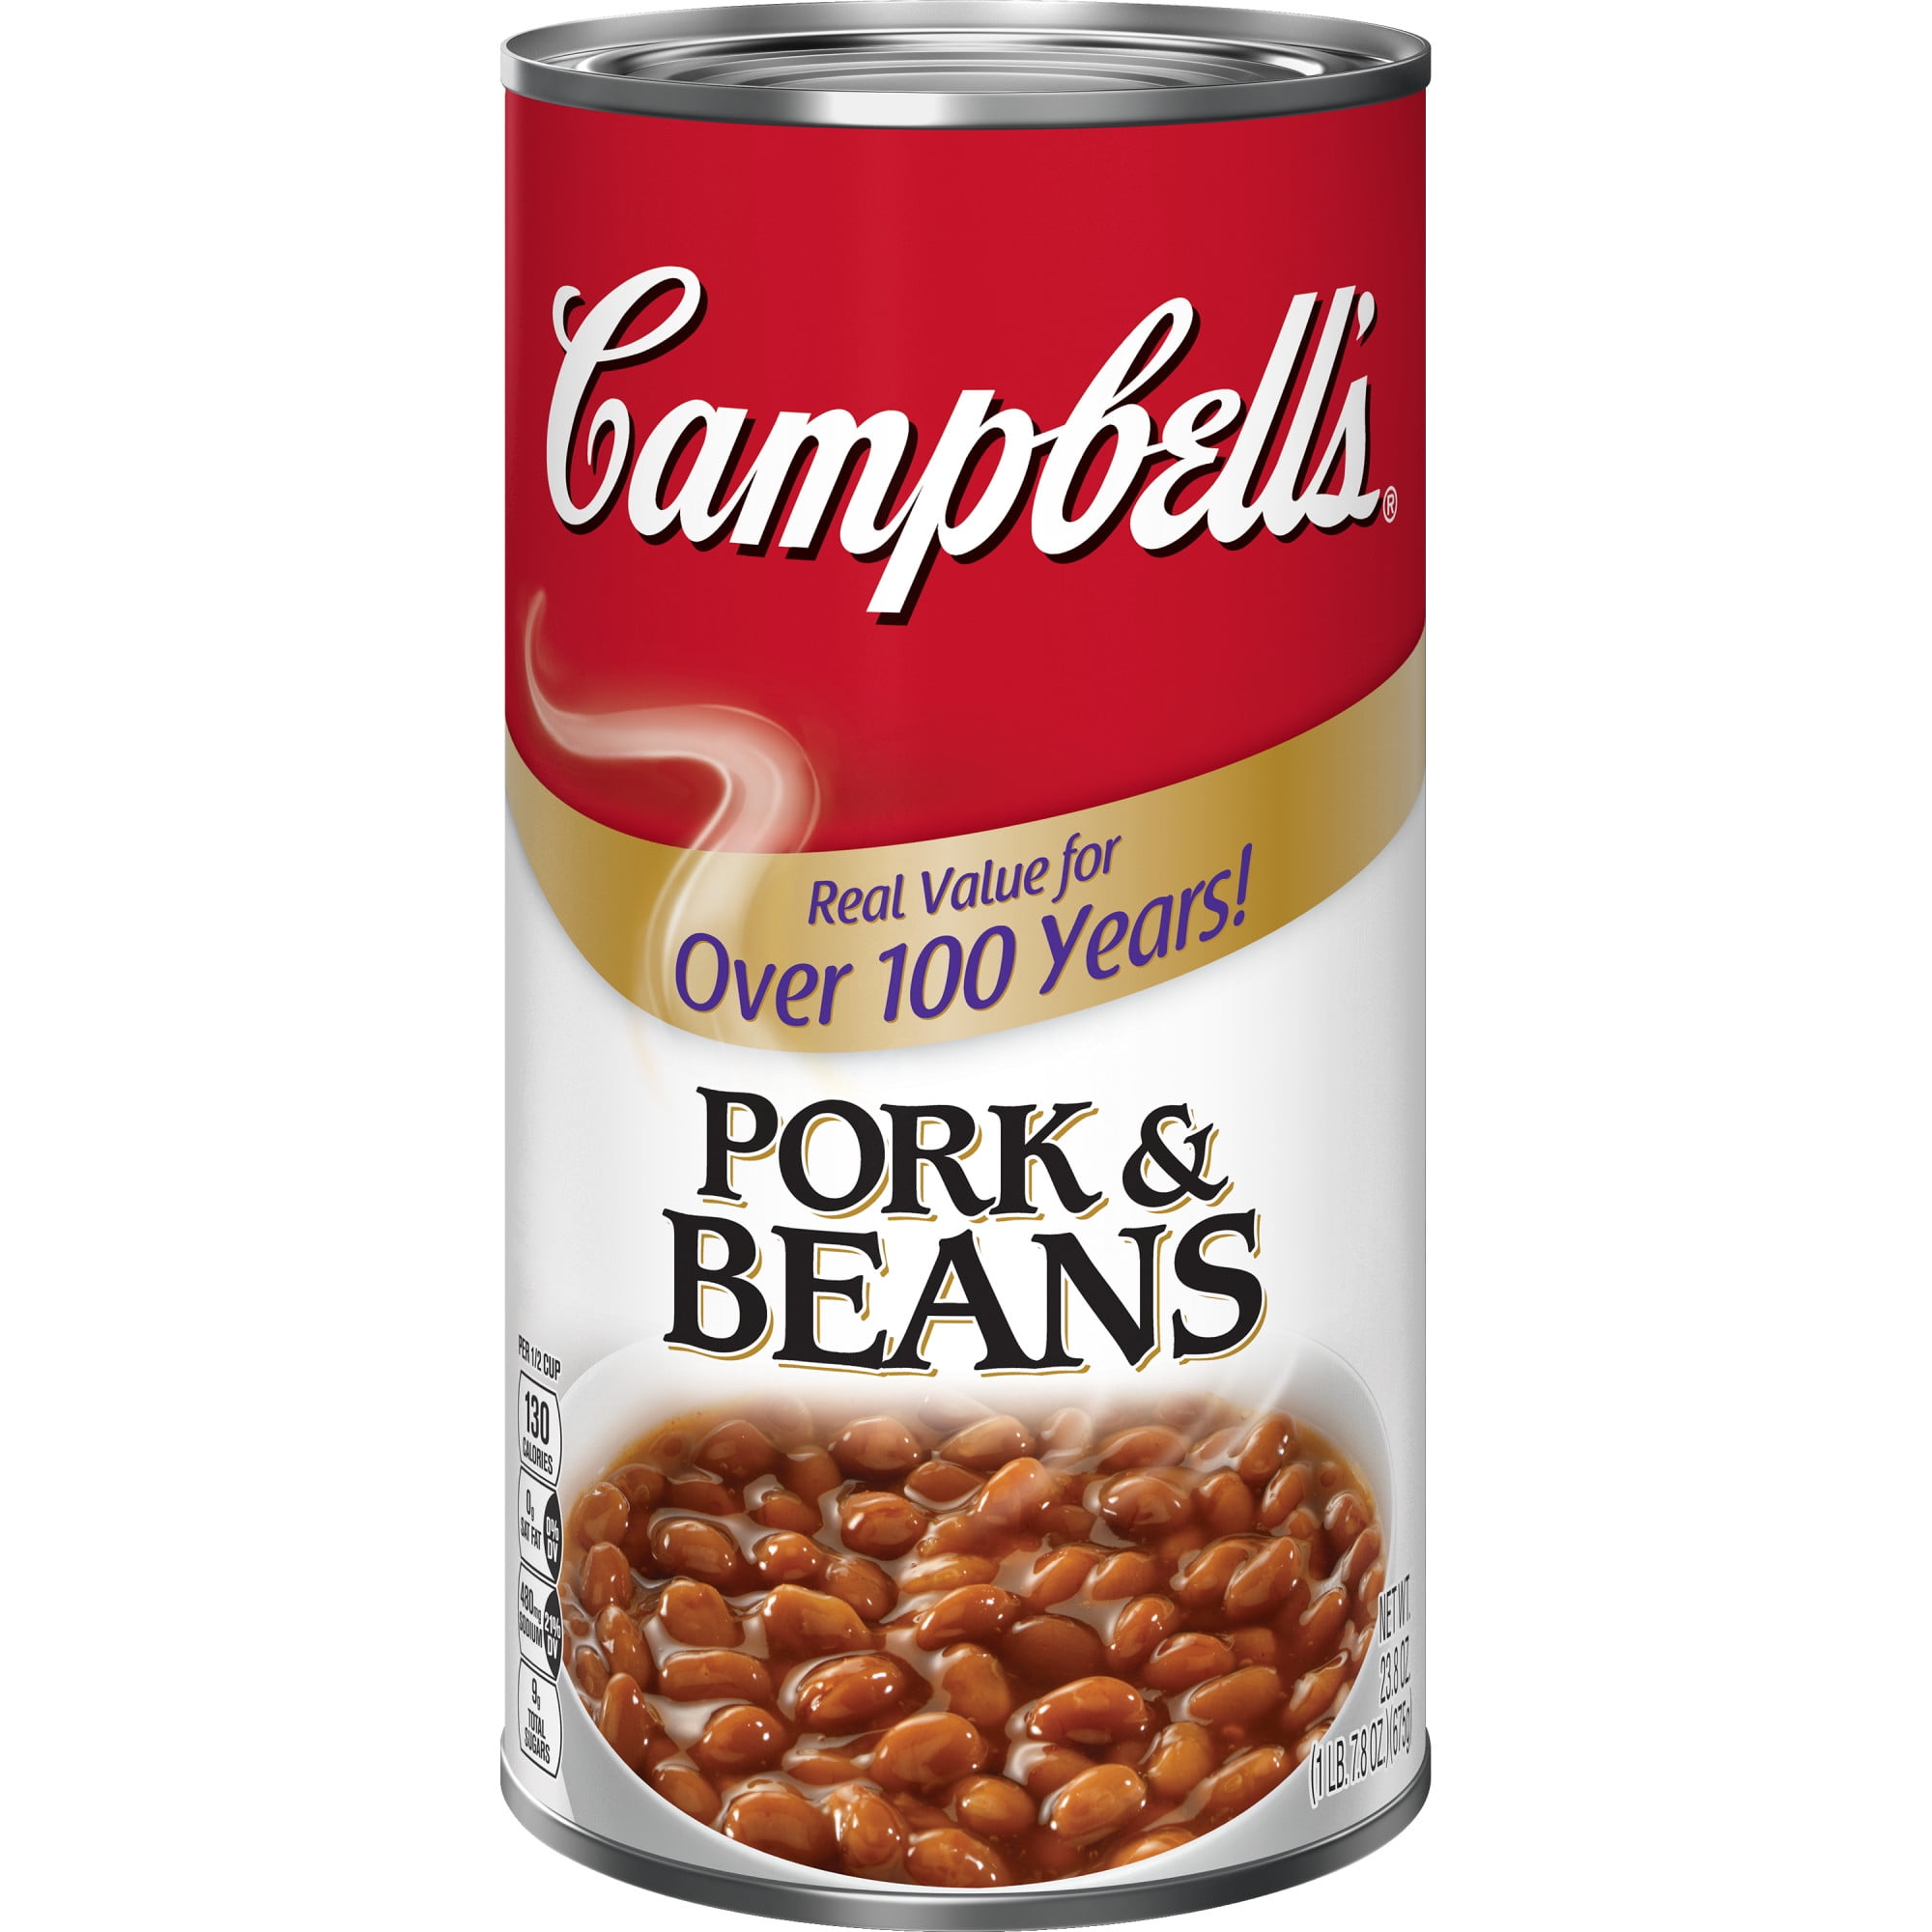 Some beans. Canned Pork. Pork and Beans. Canned Beans. Pork and Beans canned.